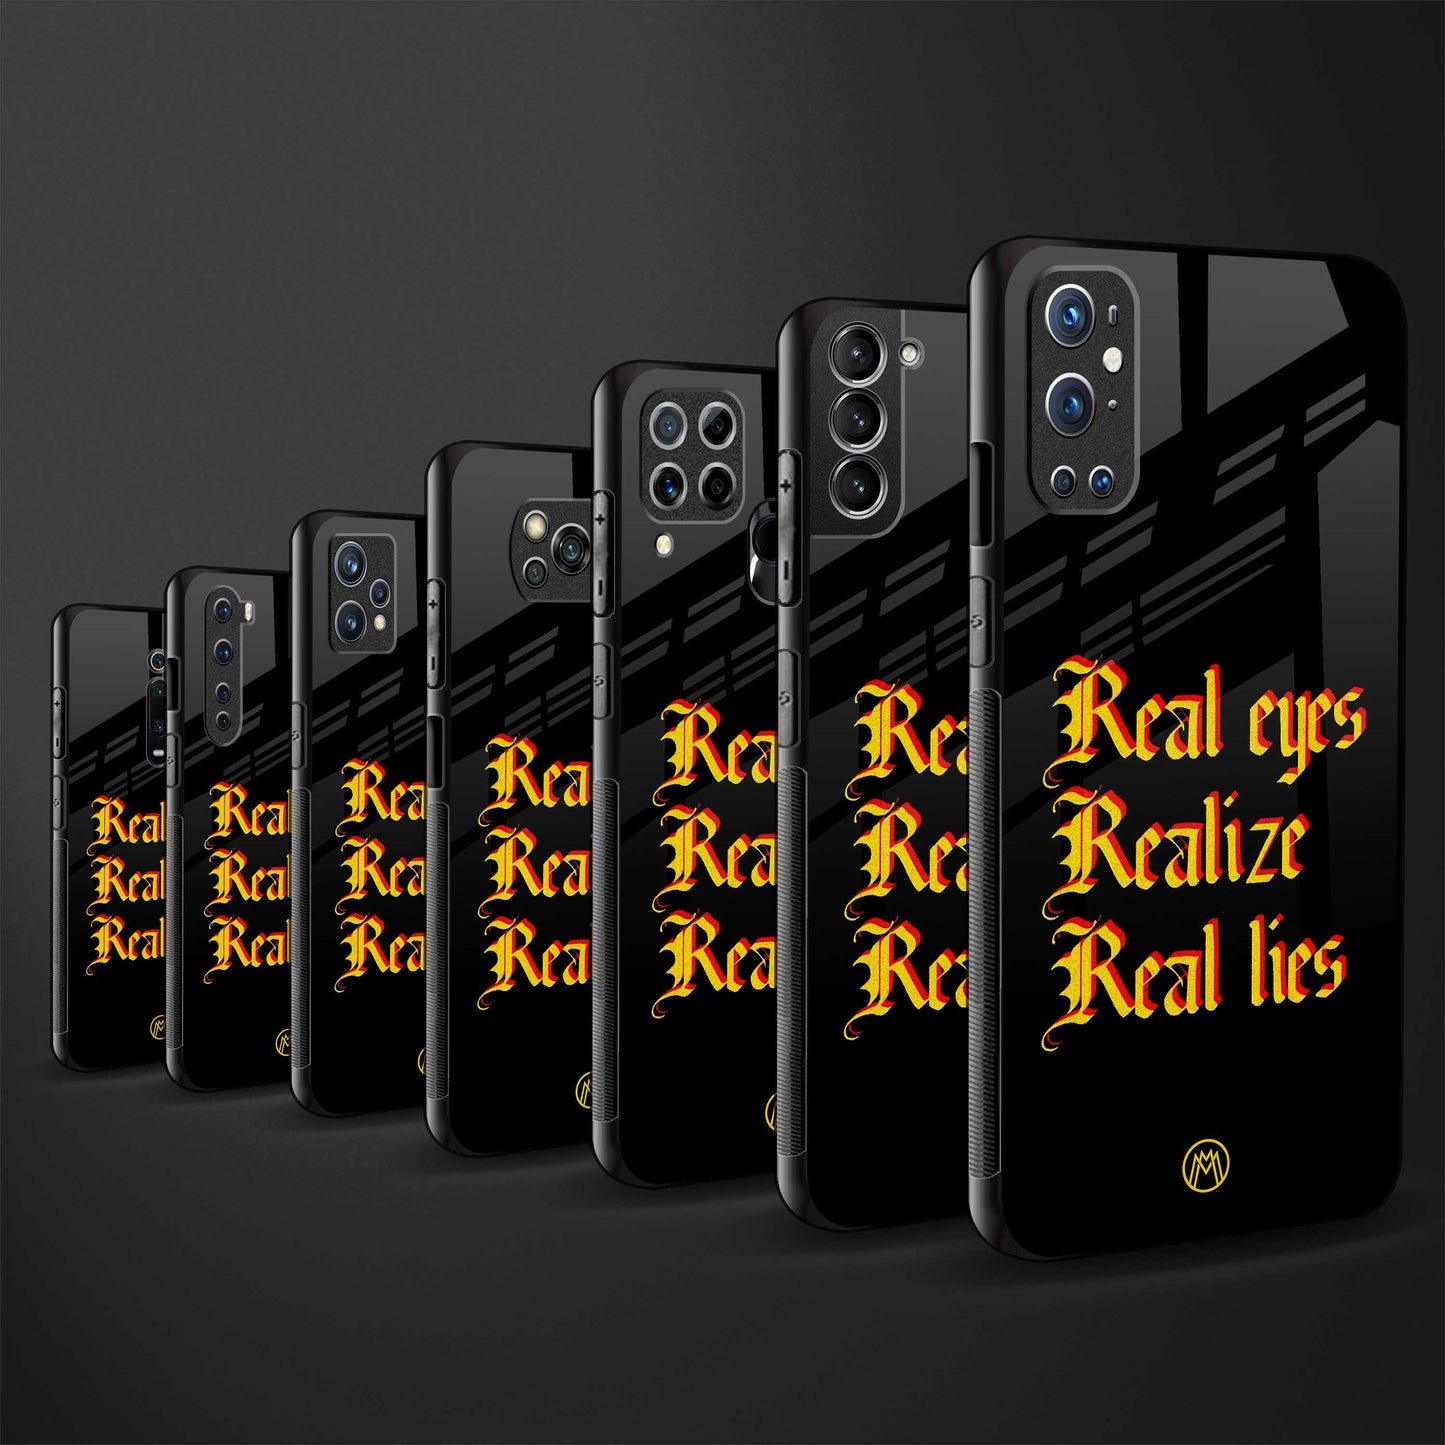 real eyes realize real lies quote glass case for realme 2 pro image-3